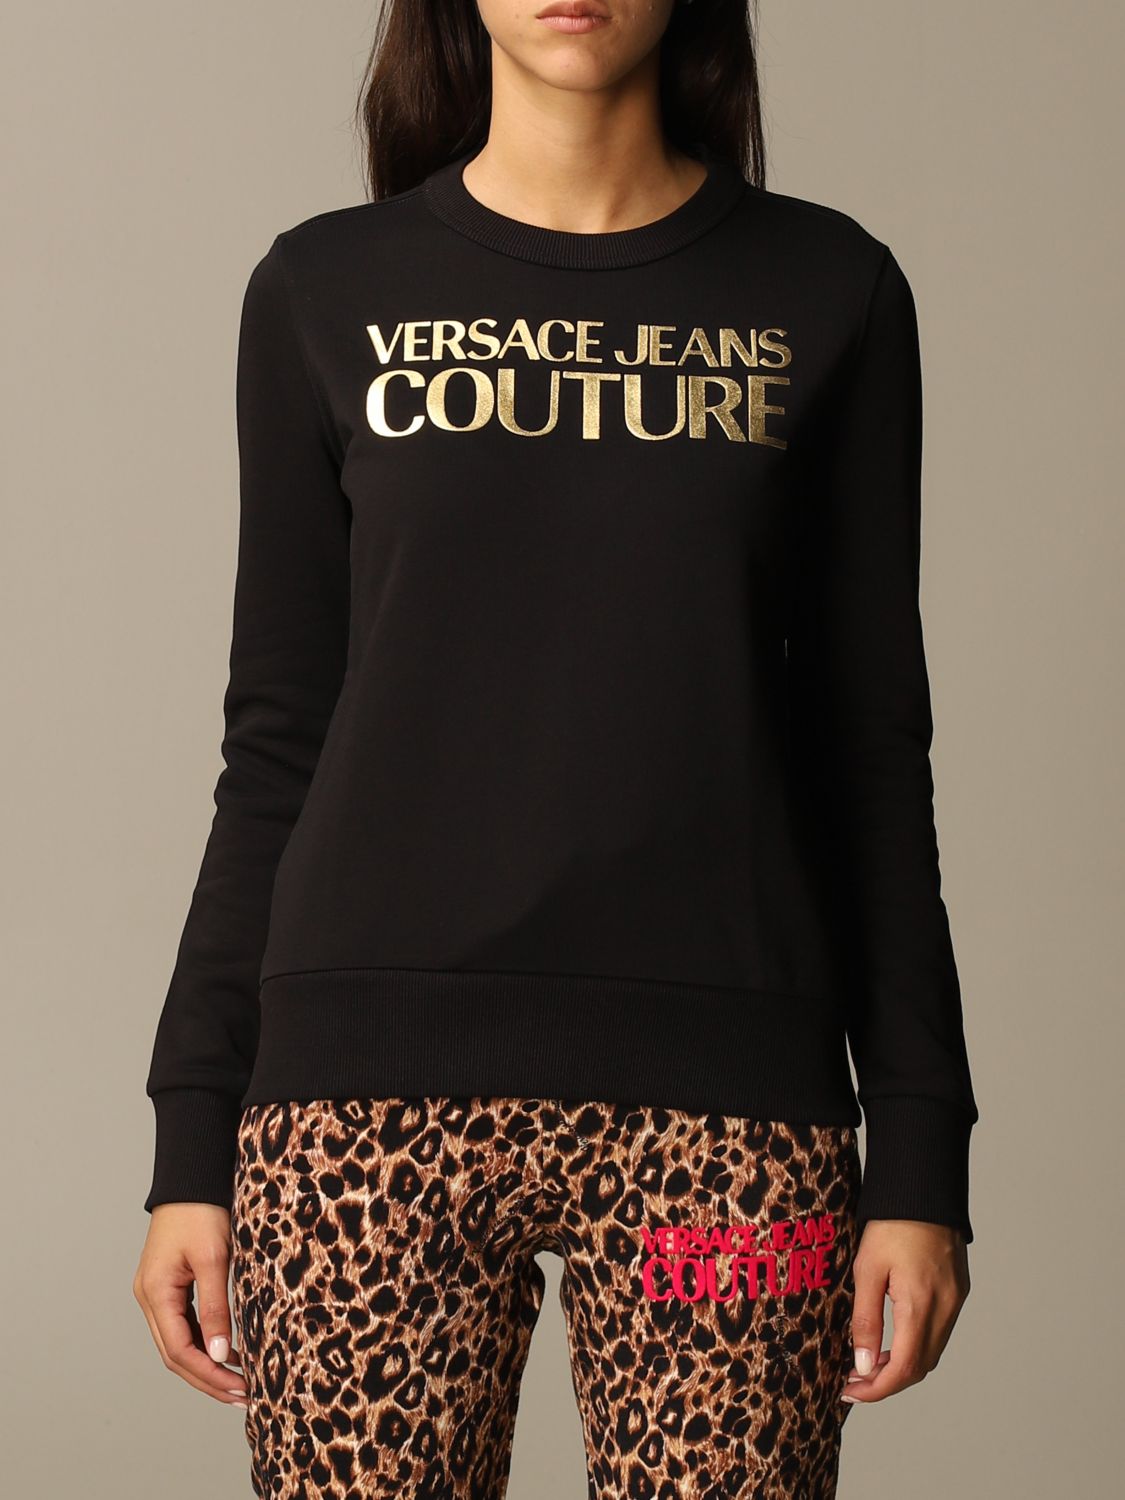 versace jeans couture woman